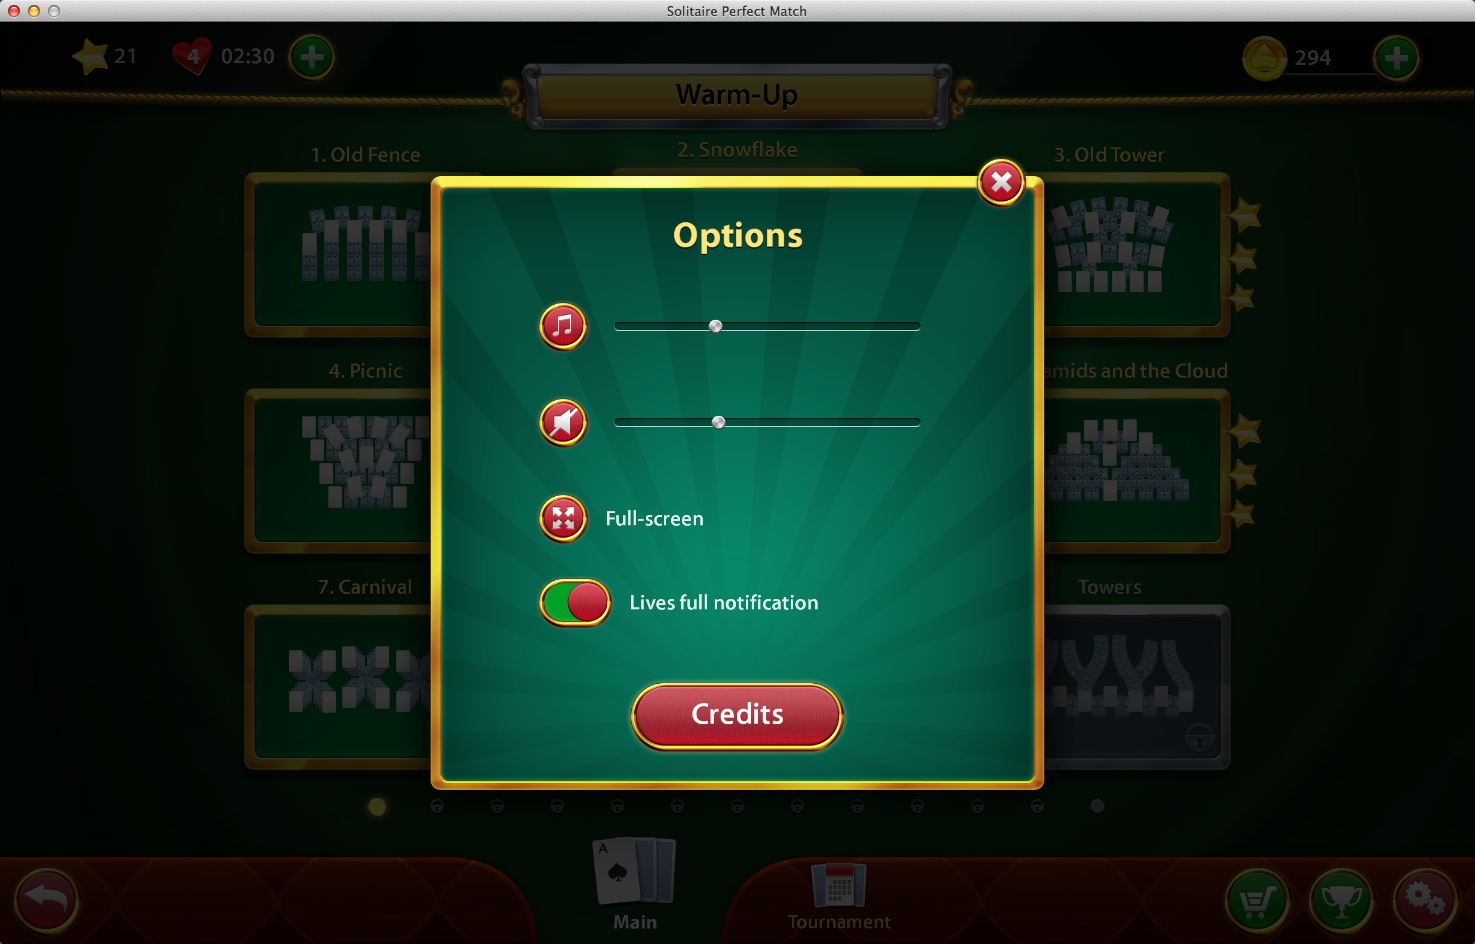 Solitaire Perfect Match : Game Options